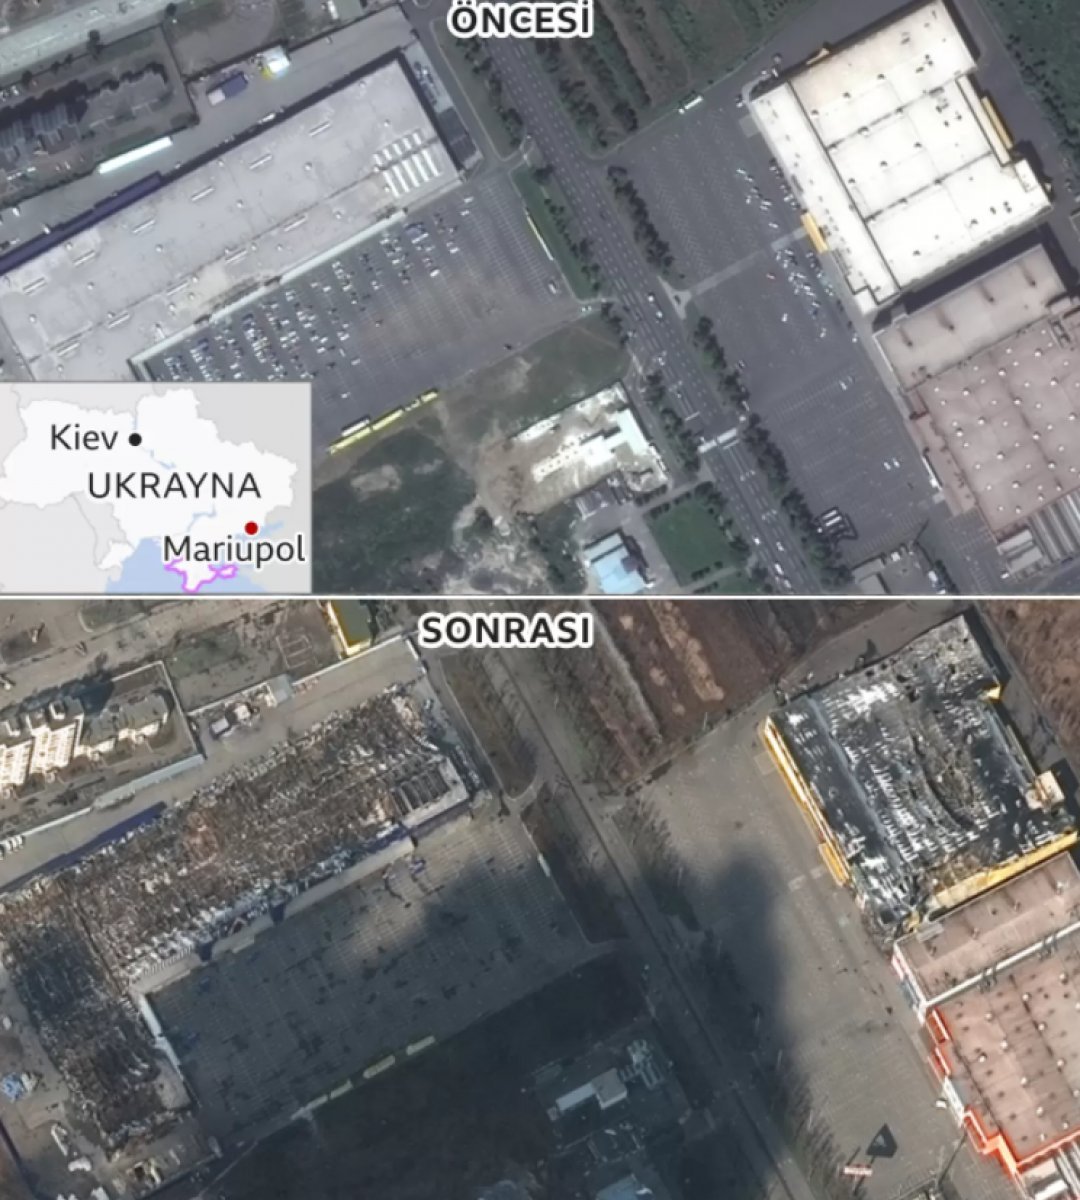 Frames of the extent of destruction in Mariupol #3